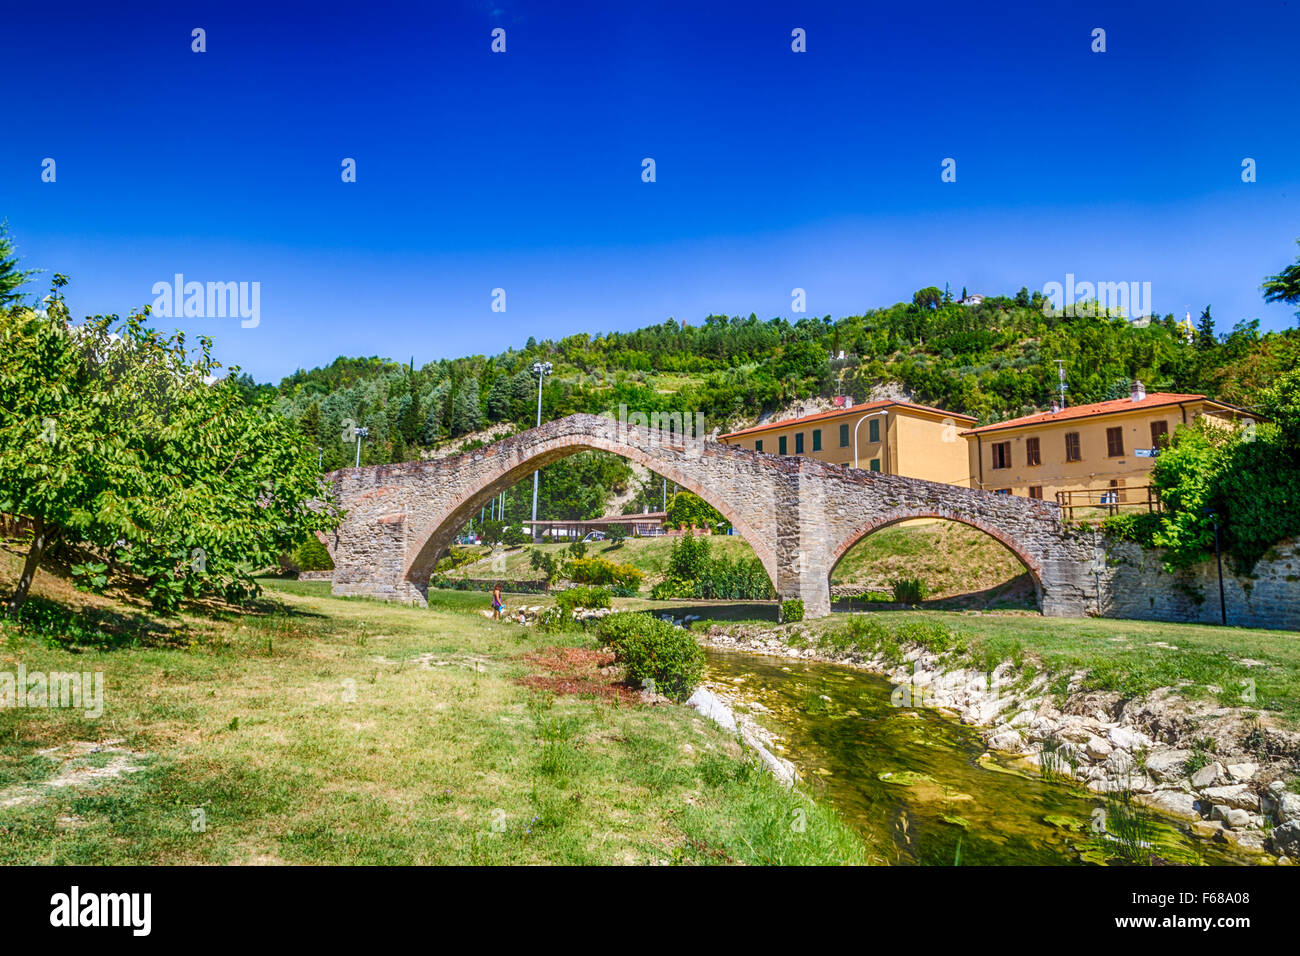 The XVIII century bridge in Modigliana in Italy is overlooking the quiet waters of the small creek with the medieval humpback structure of the three archs Stock Photo